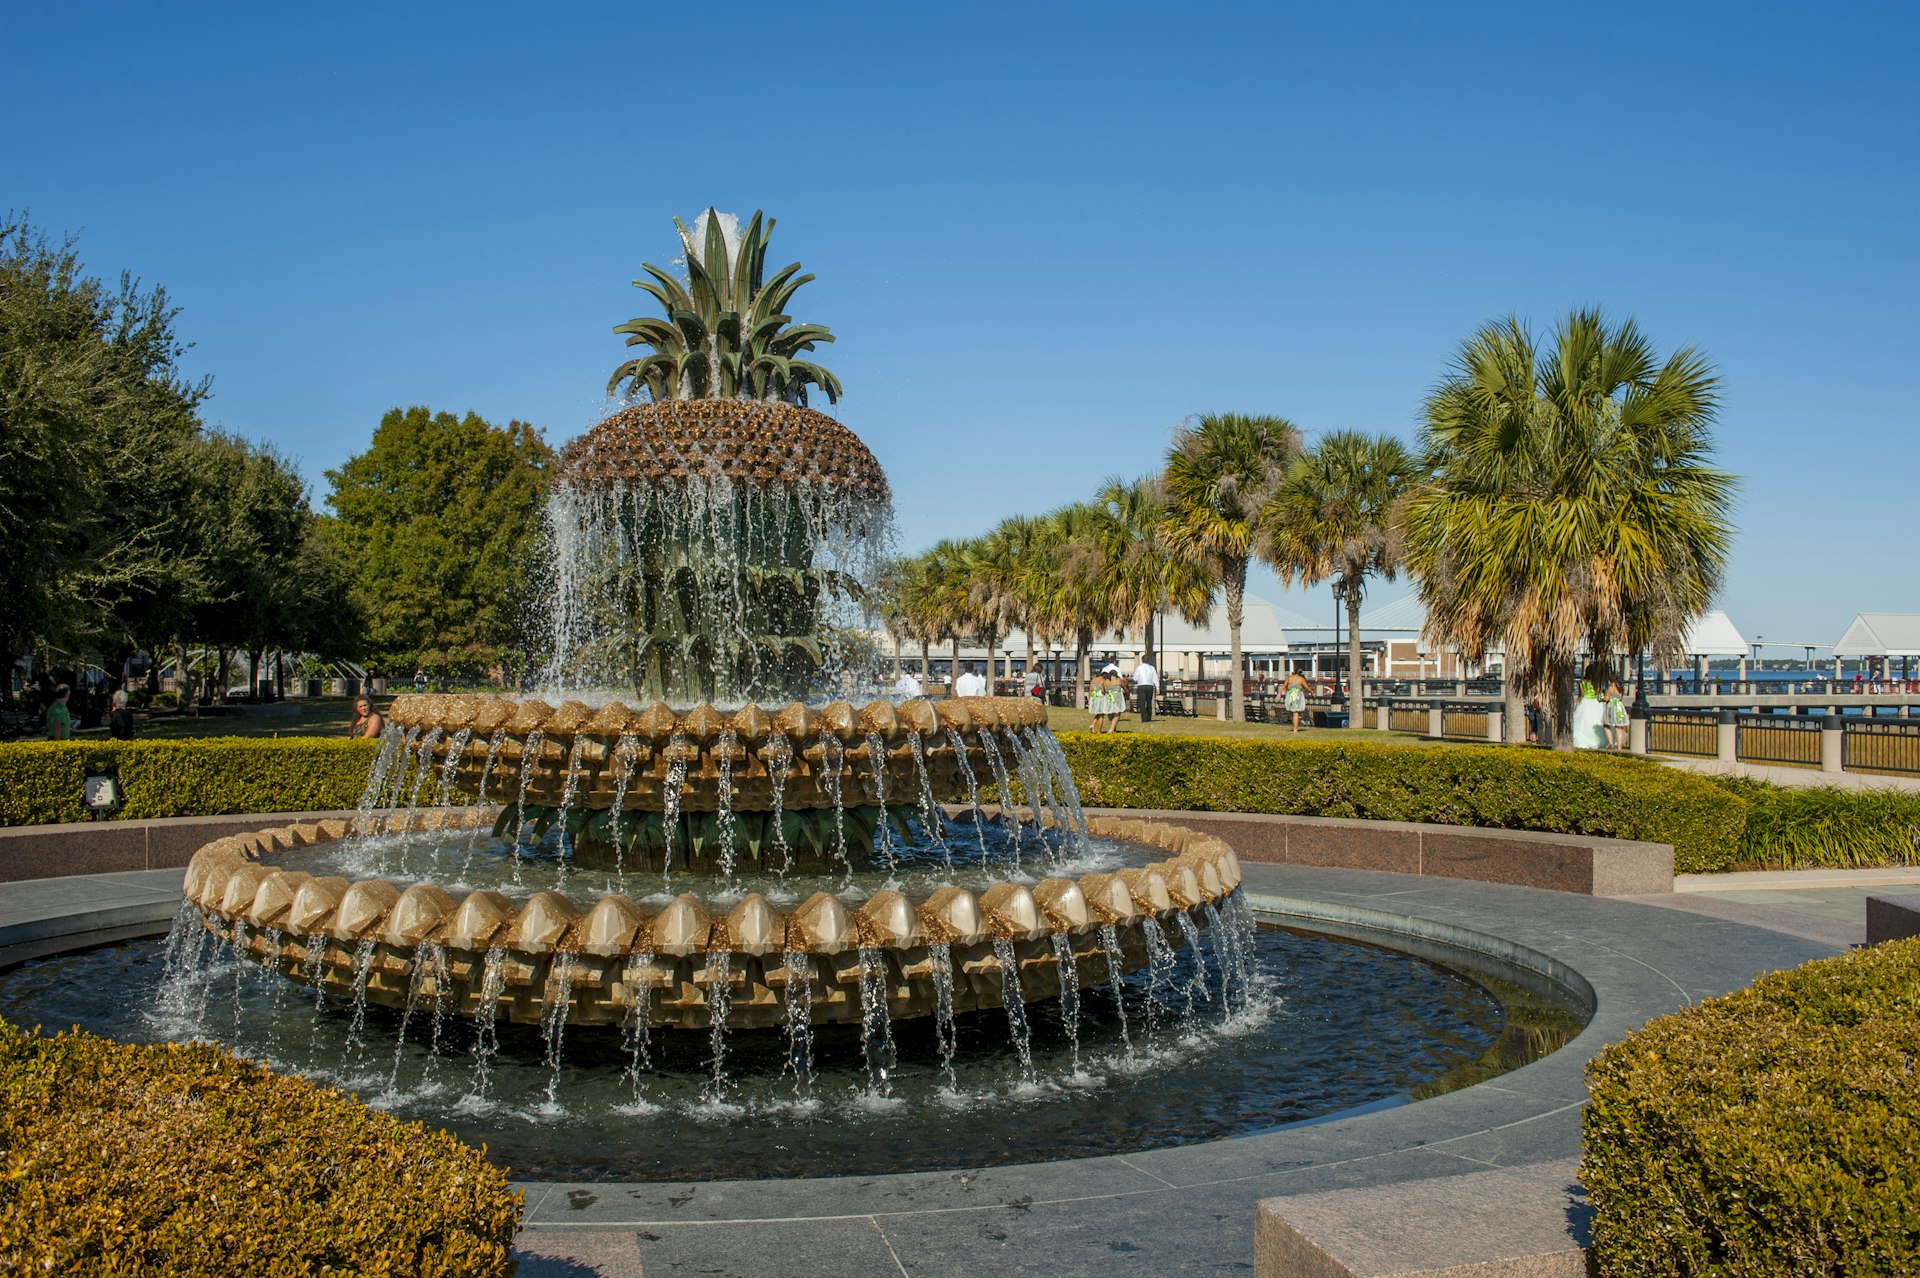 The pineapple fountain at the Waterfront Park in Charleston in South Carolina, USA.